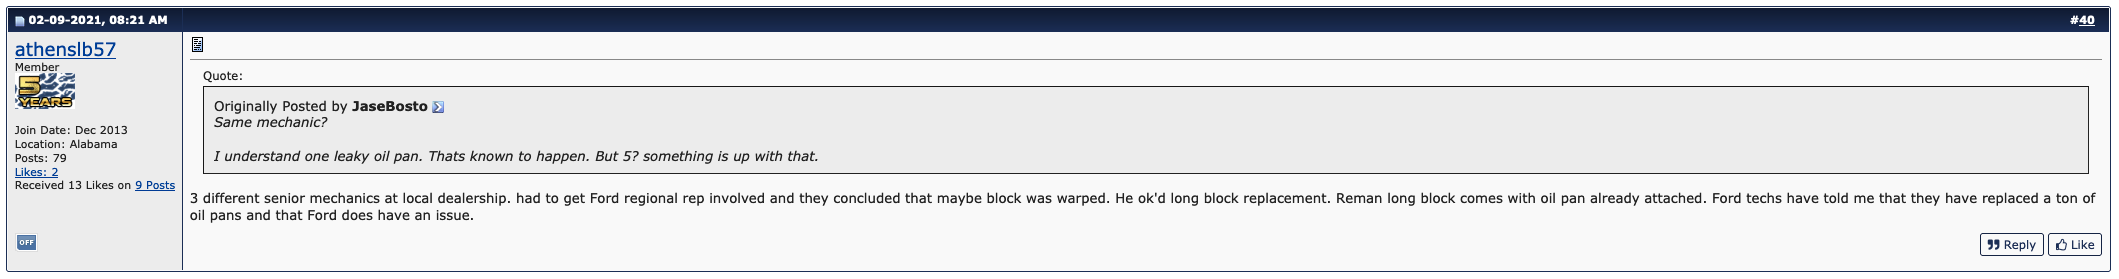 screenshot shows message board thread where owners describe ford's plastic oil pan leaks